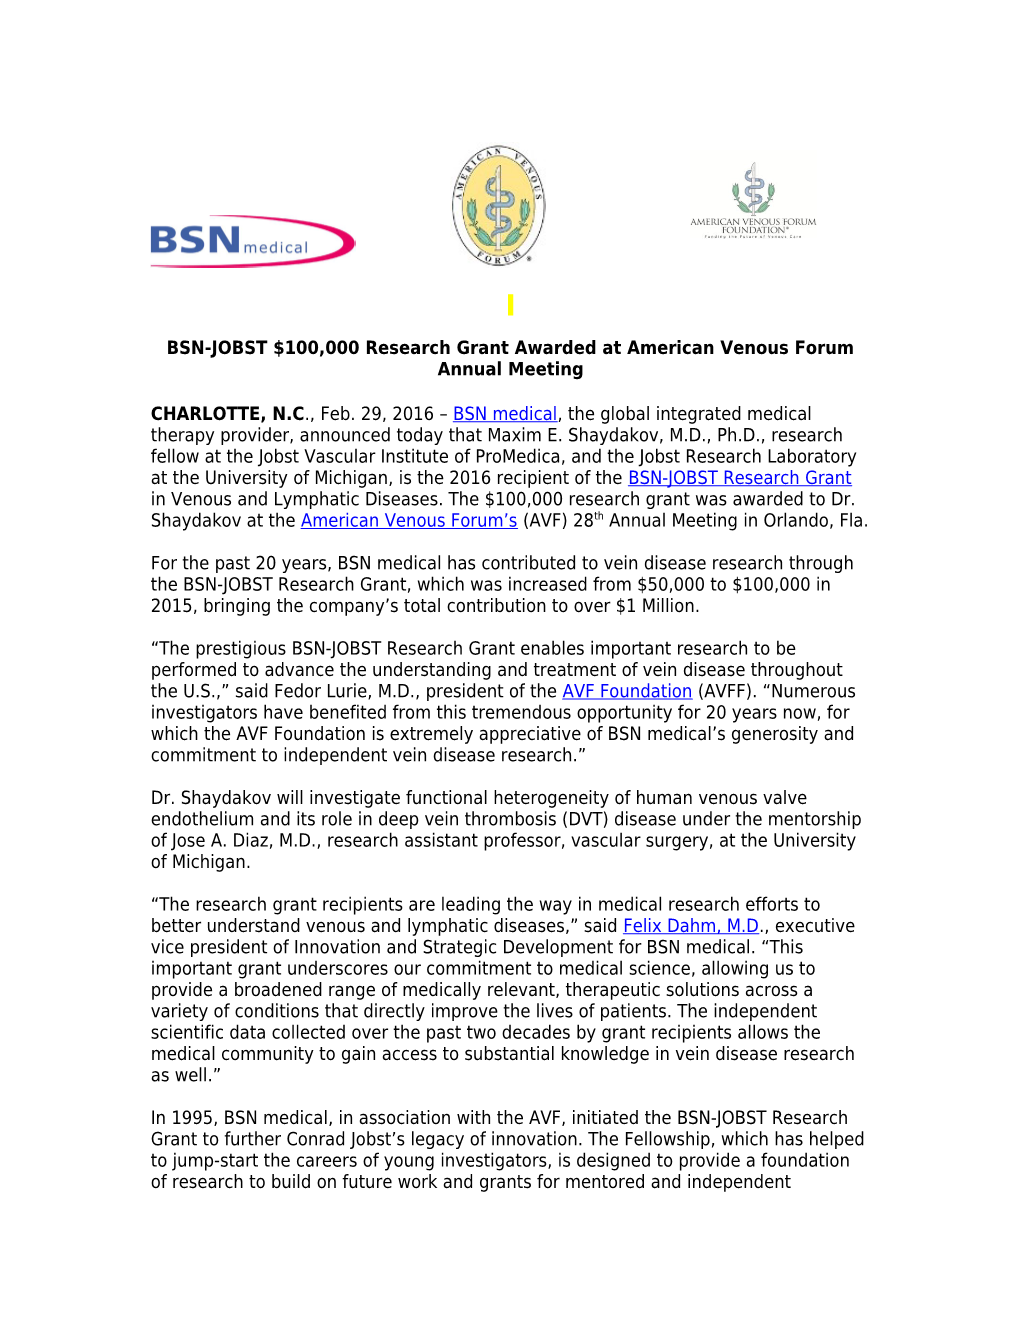 BSN-JOBST $100,000 Research Grant Awarded at American Venous Forumannual Meeting